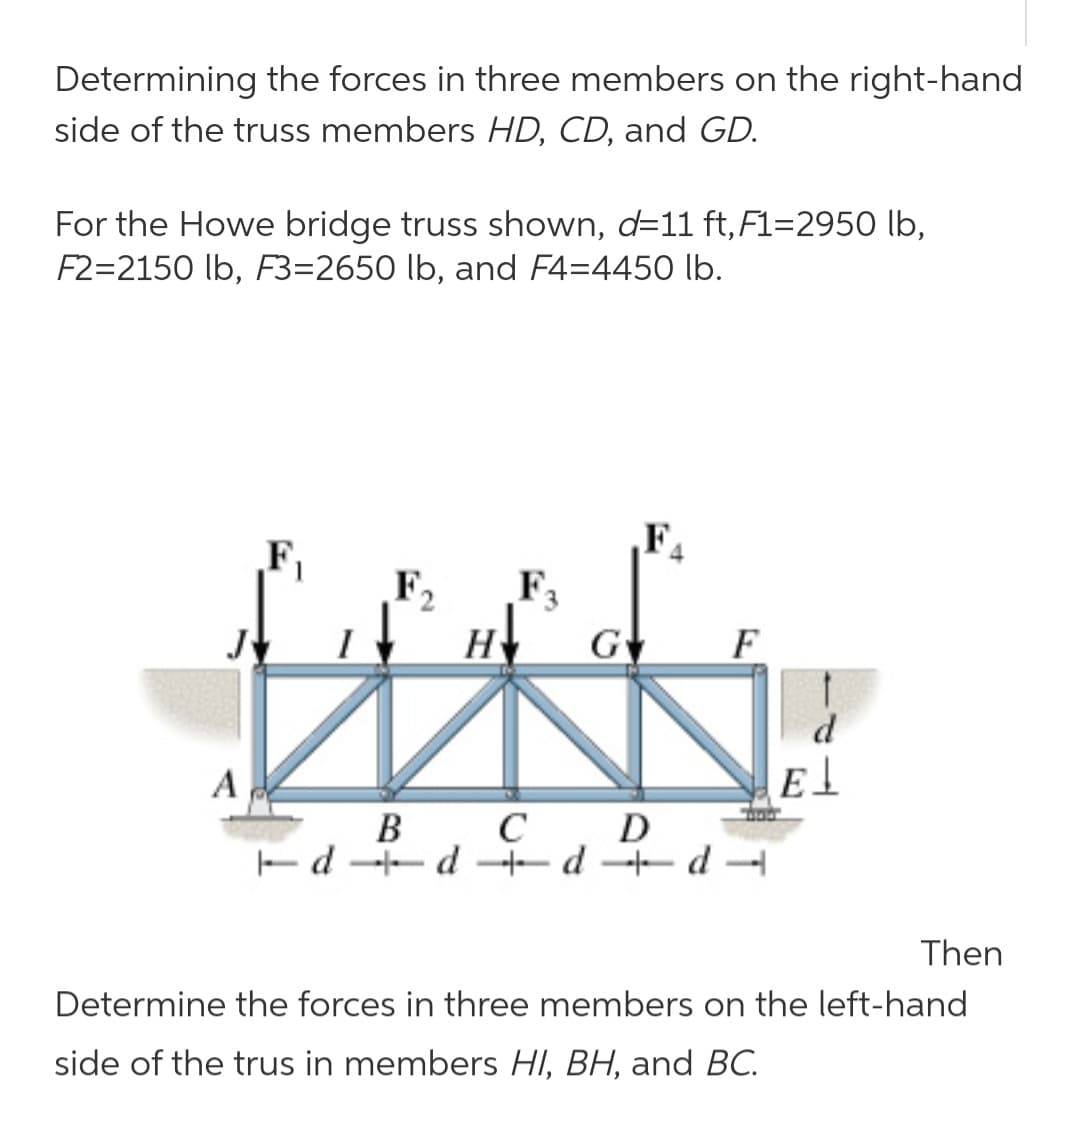 Determining the forces in three members on the right-hand
side of the truss members HD, CD, and GD.
For the Howe bridge truss shown, d=11 ft,F1=2950 lb,
F2=2150 lb, F3=2650 lb, and F4=4450 lb.
FA
F1
Fa
GY
H
F,
3.
F
d
El
A
В с
Ed d -+d+d -
D
Then
Determine the forces in three members on the left-hand
side of the trus in members HI, BH, and BC.
